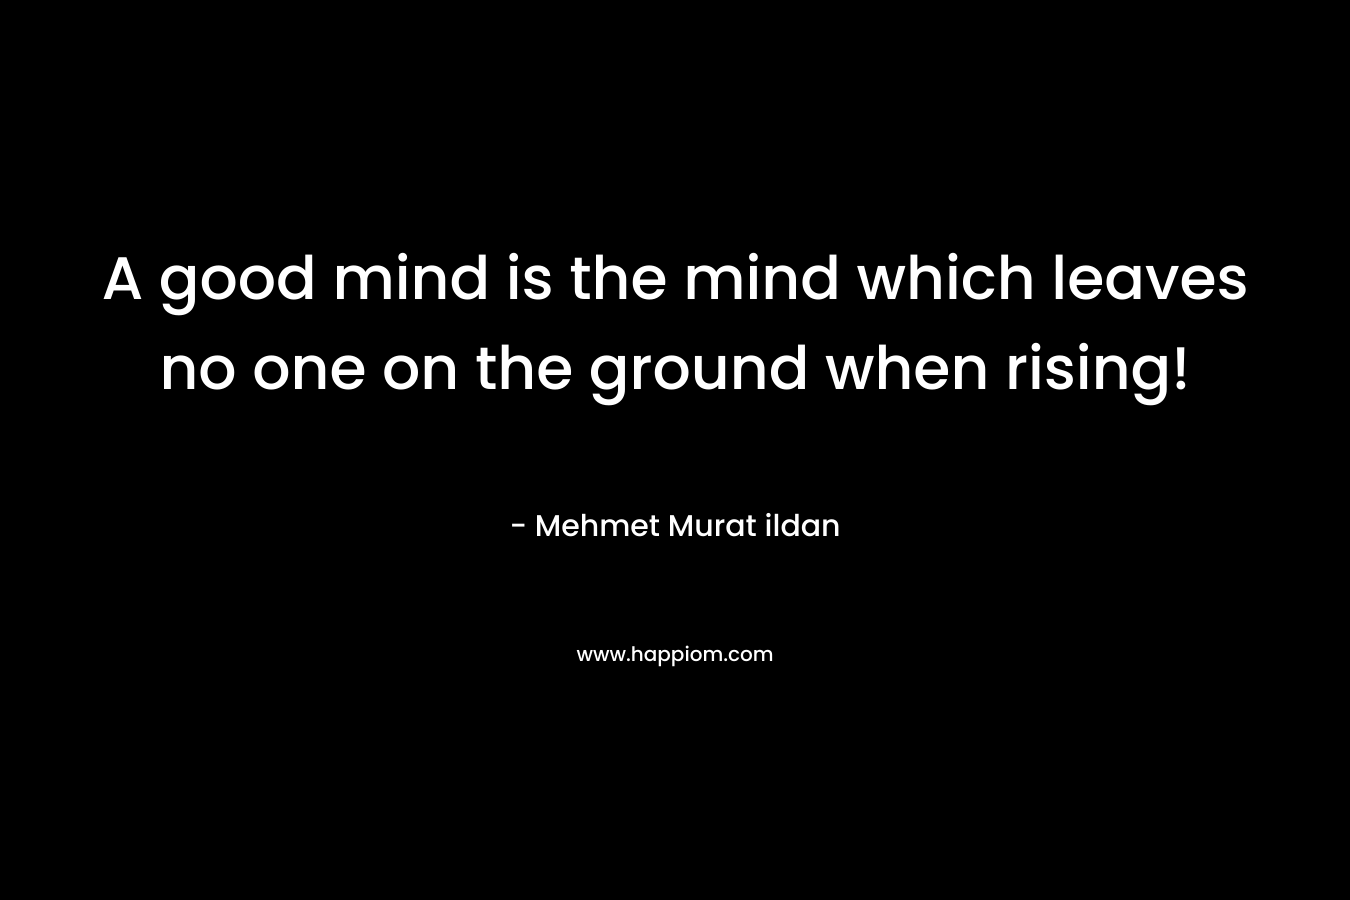 A good mind is the mind which leaves no one on the ground when rising! – Mehmet Murat ildan